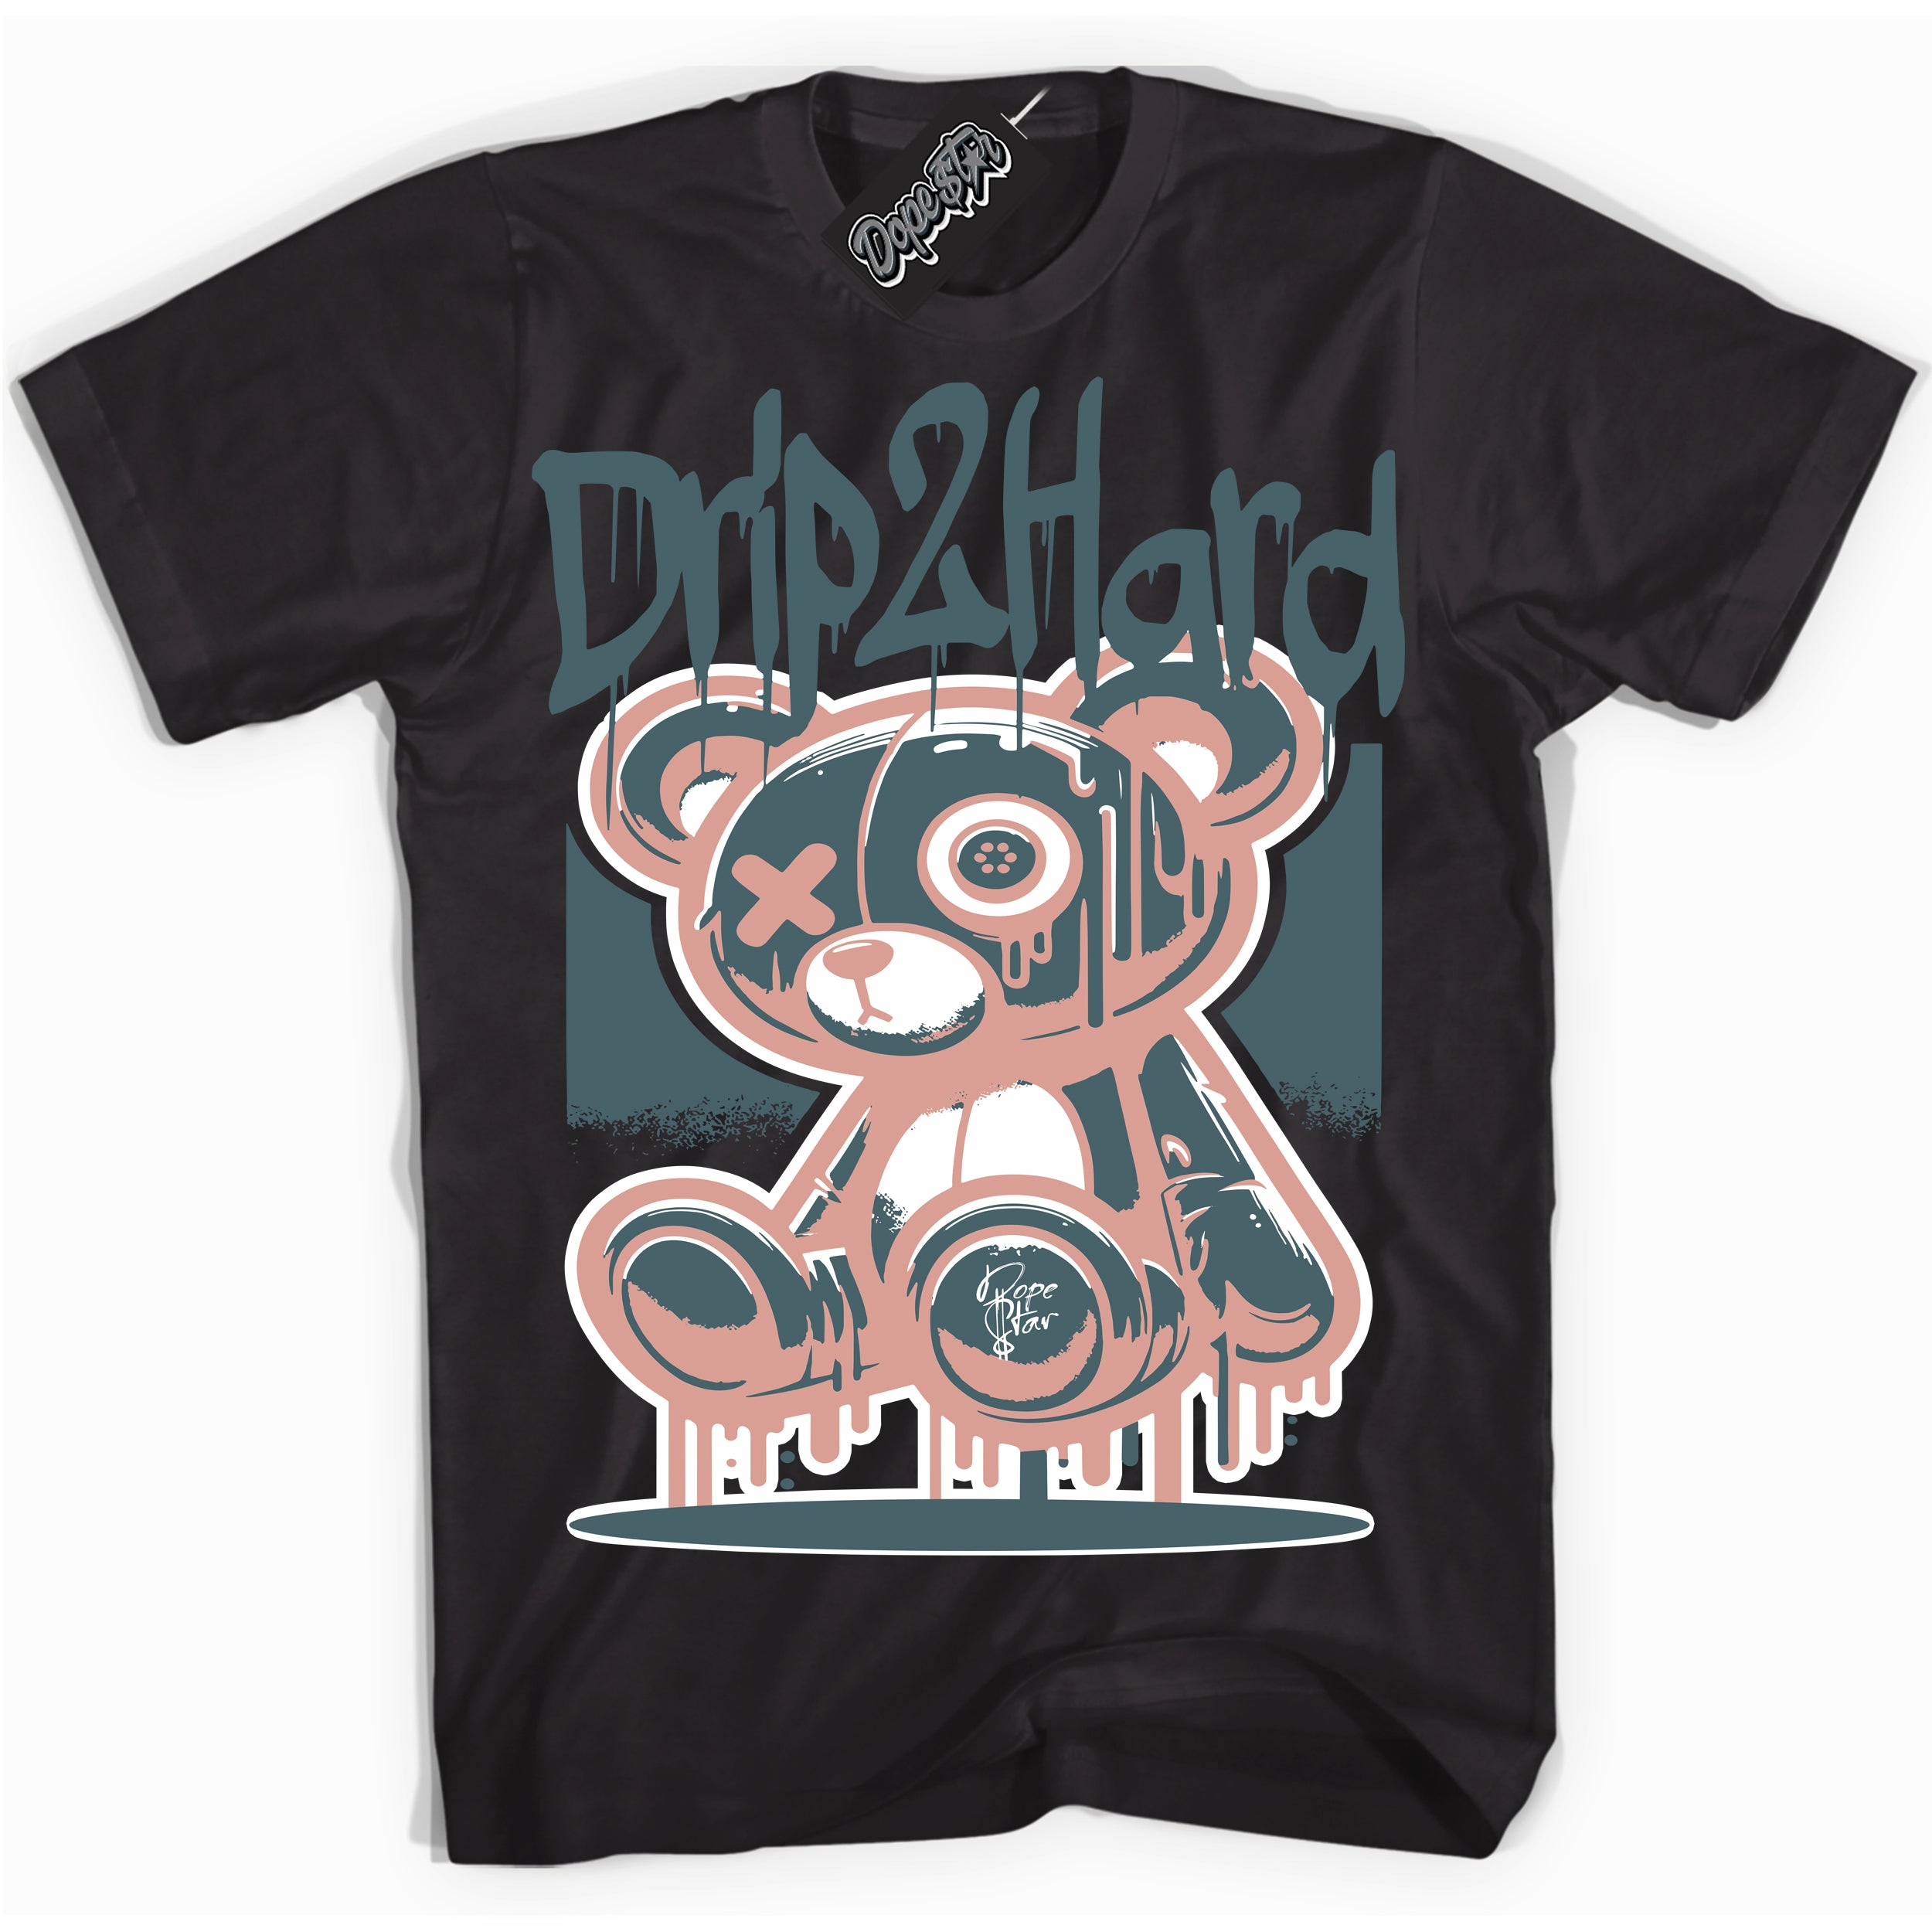 Cool Black graphic tee with “ Drip 2 Hard ” design, that perfectly matches Dark Teal Green 1s